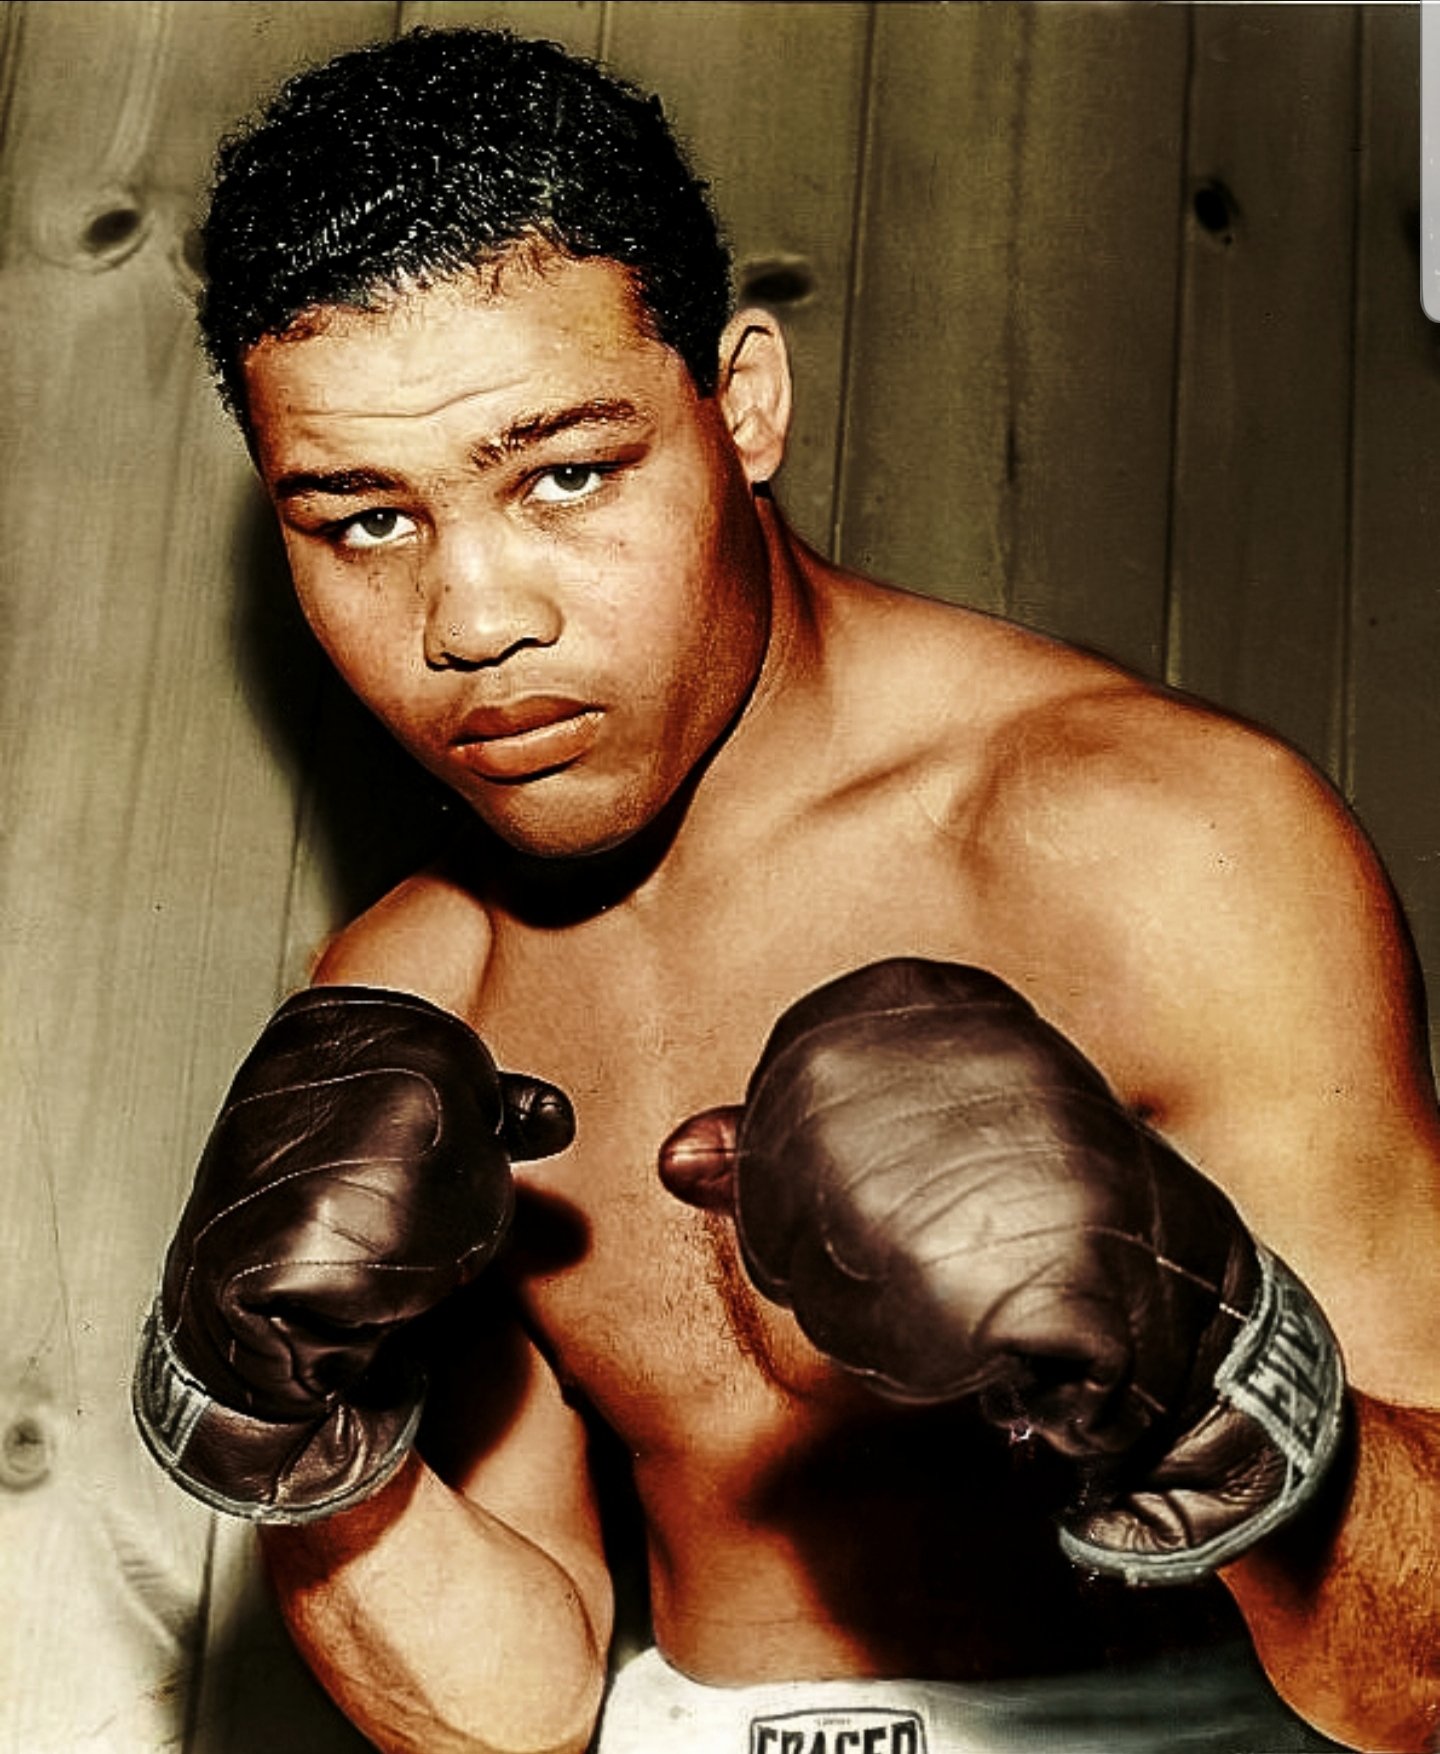 Sold at Auction: BOXING GEAR SIGNED BY THE BROWN BOMBER JOE LOUIS